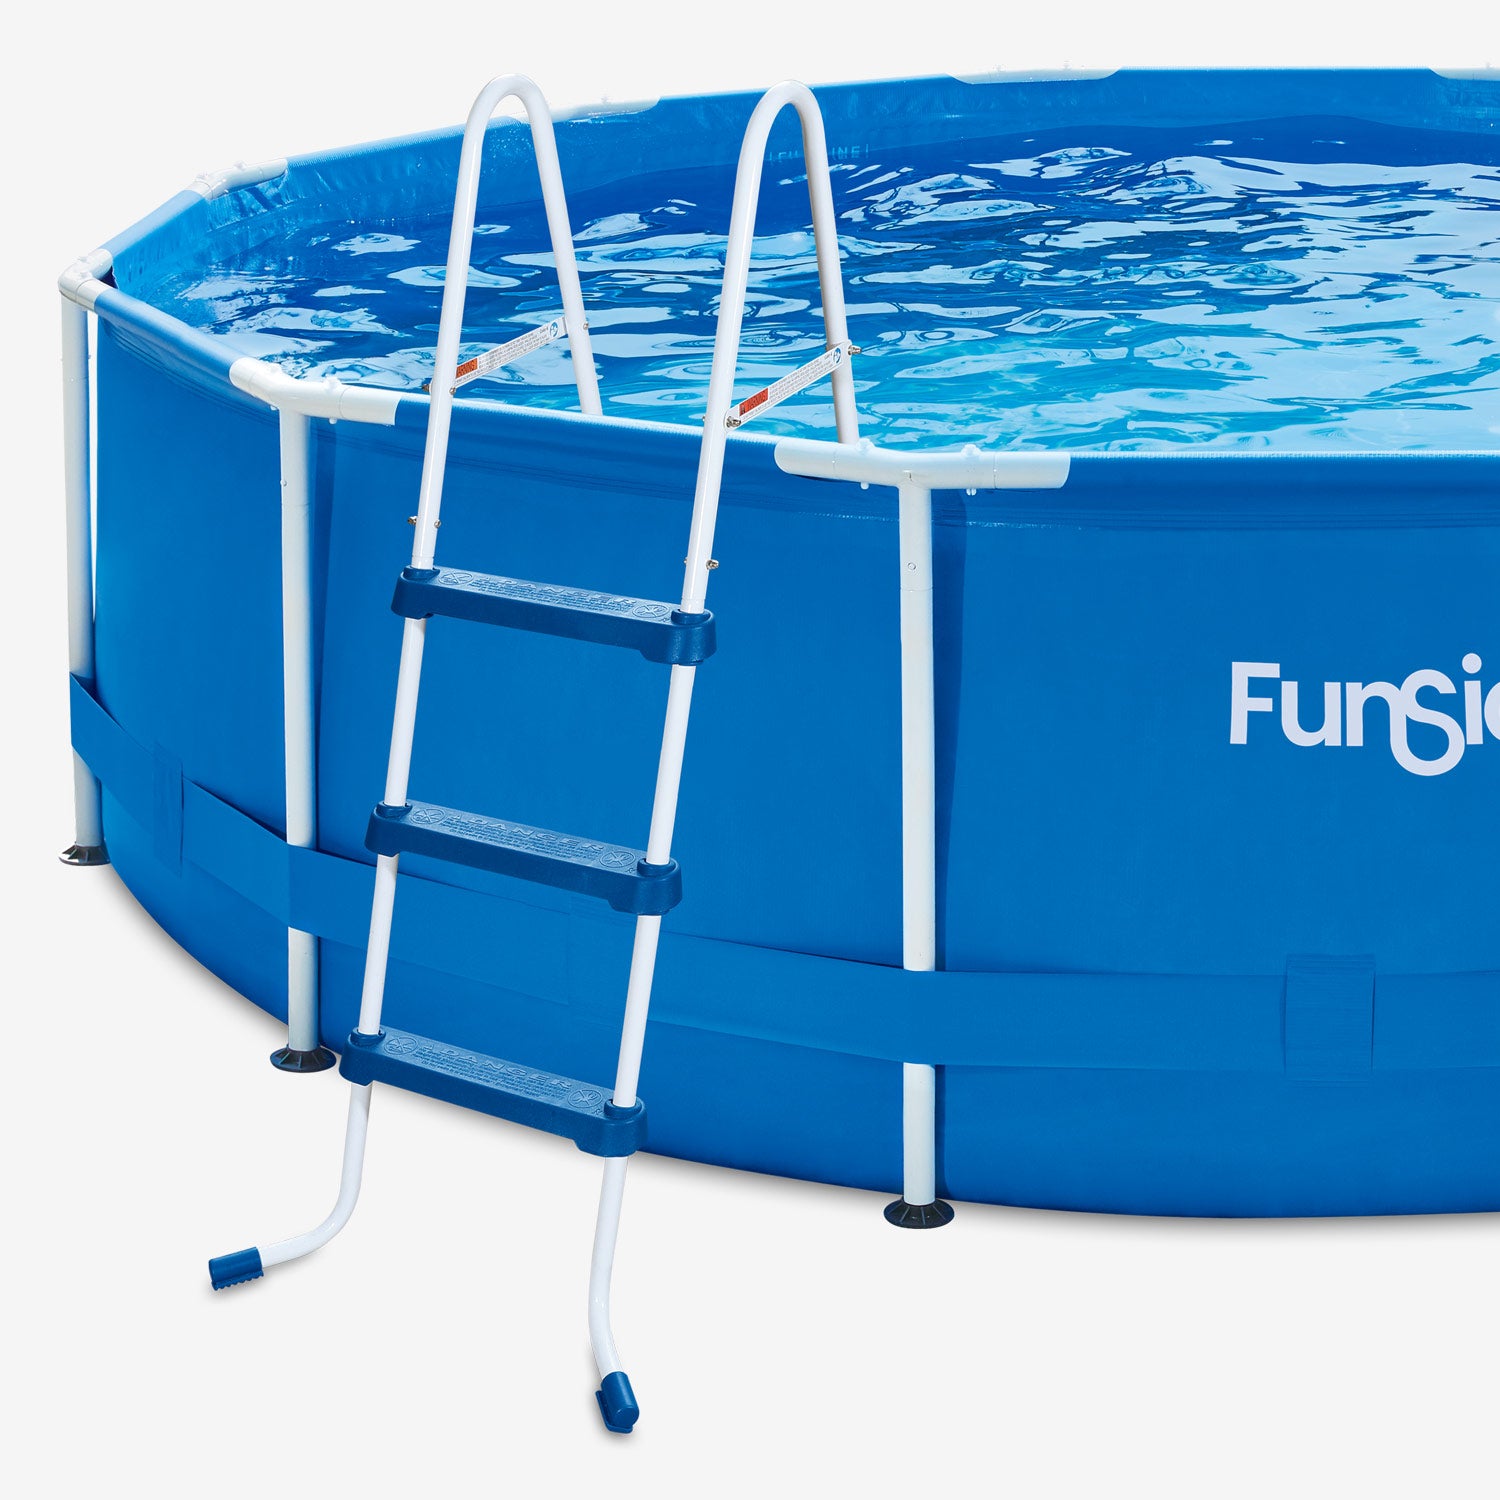 Funsicle 42" SureStep Ladder next to Funsicle Activity Pool